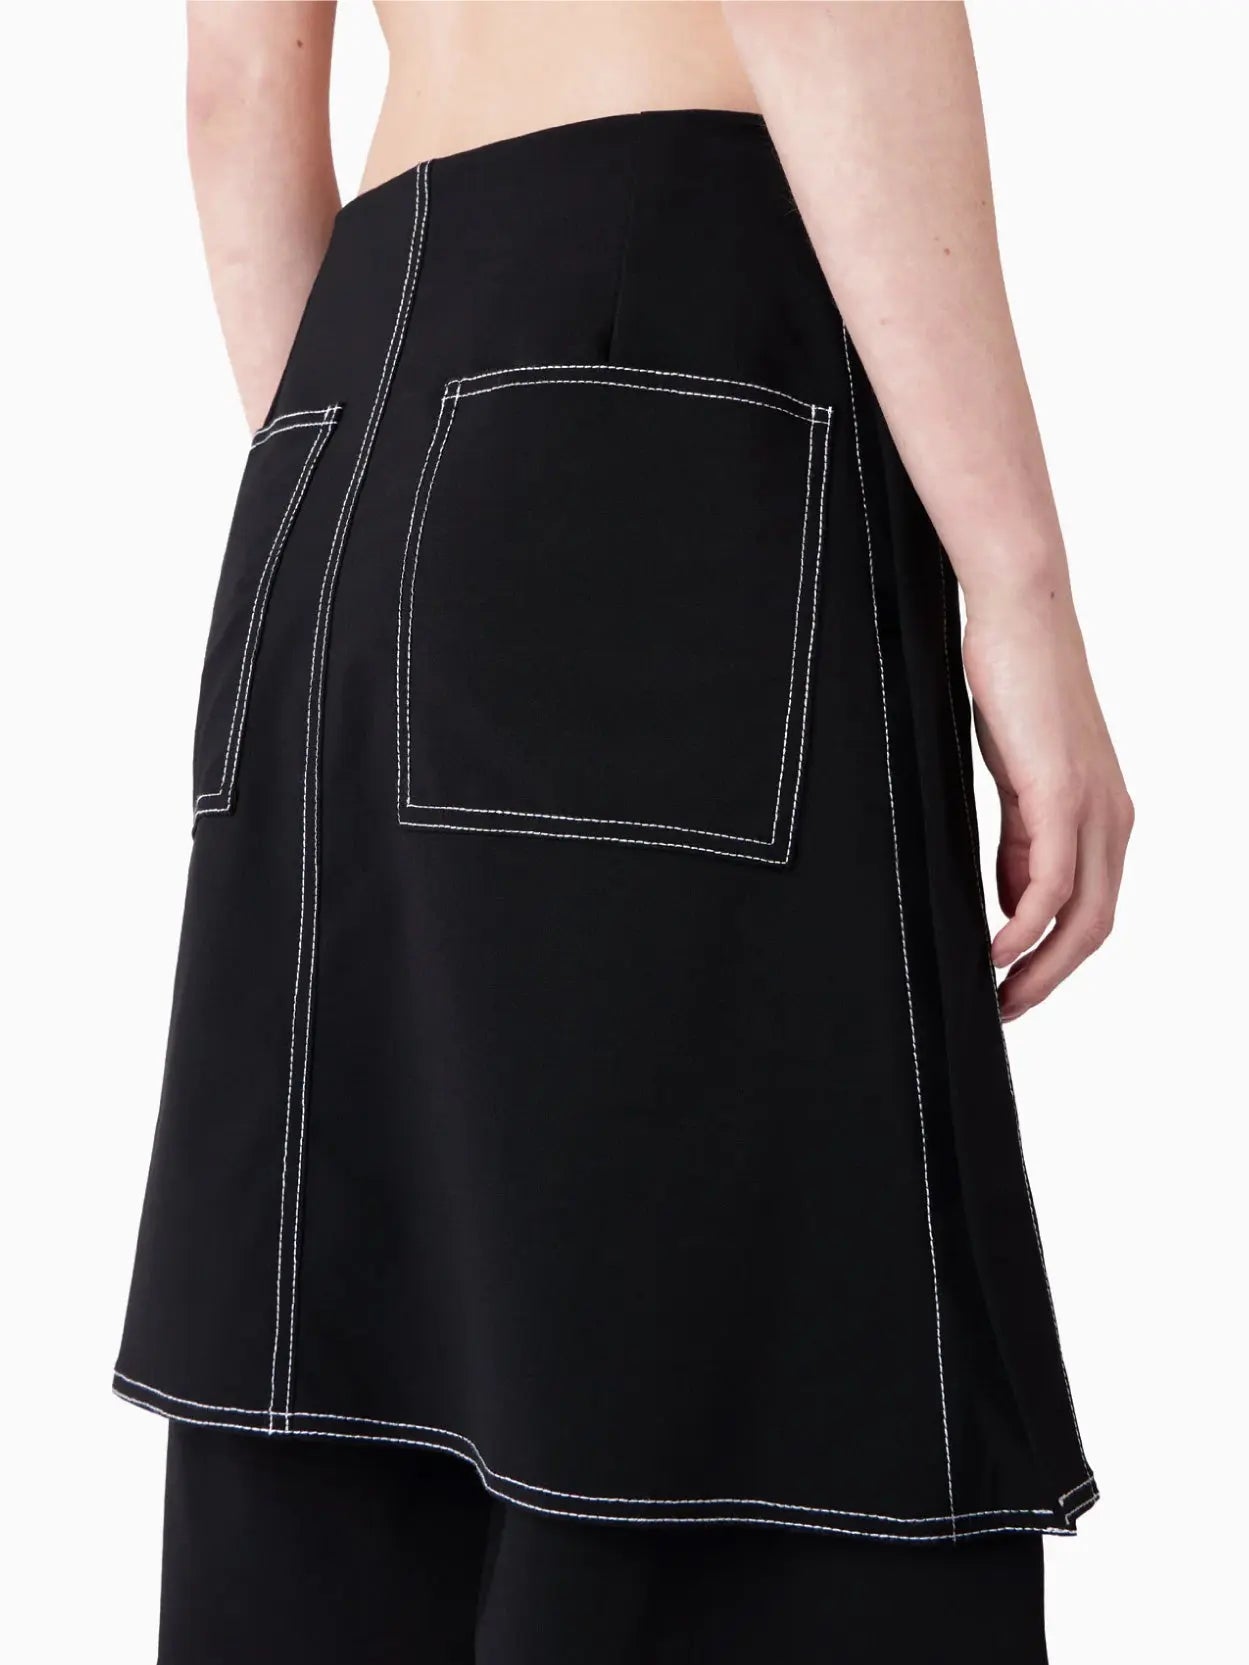 A black double-layered mini skirt with white stitching accents. The design features a layered look, with a shorter top layer and a longer underlayer, creating a stylish and modern appearance. Displayed against a white background, this chic piece is available at Bassalstore in Barcelona. The product name is Panta Skirt Black by Sunnei.